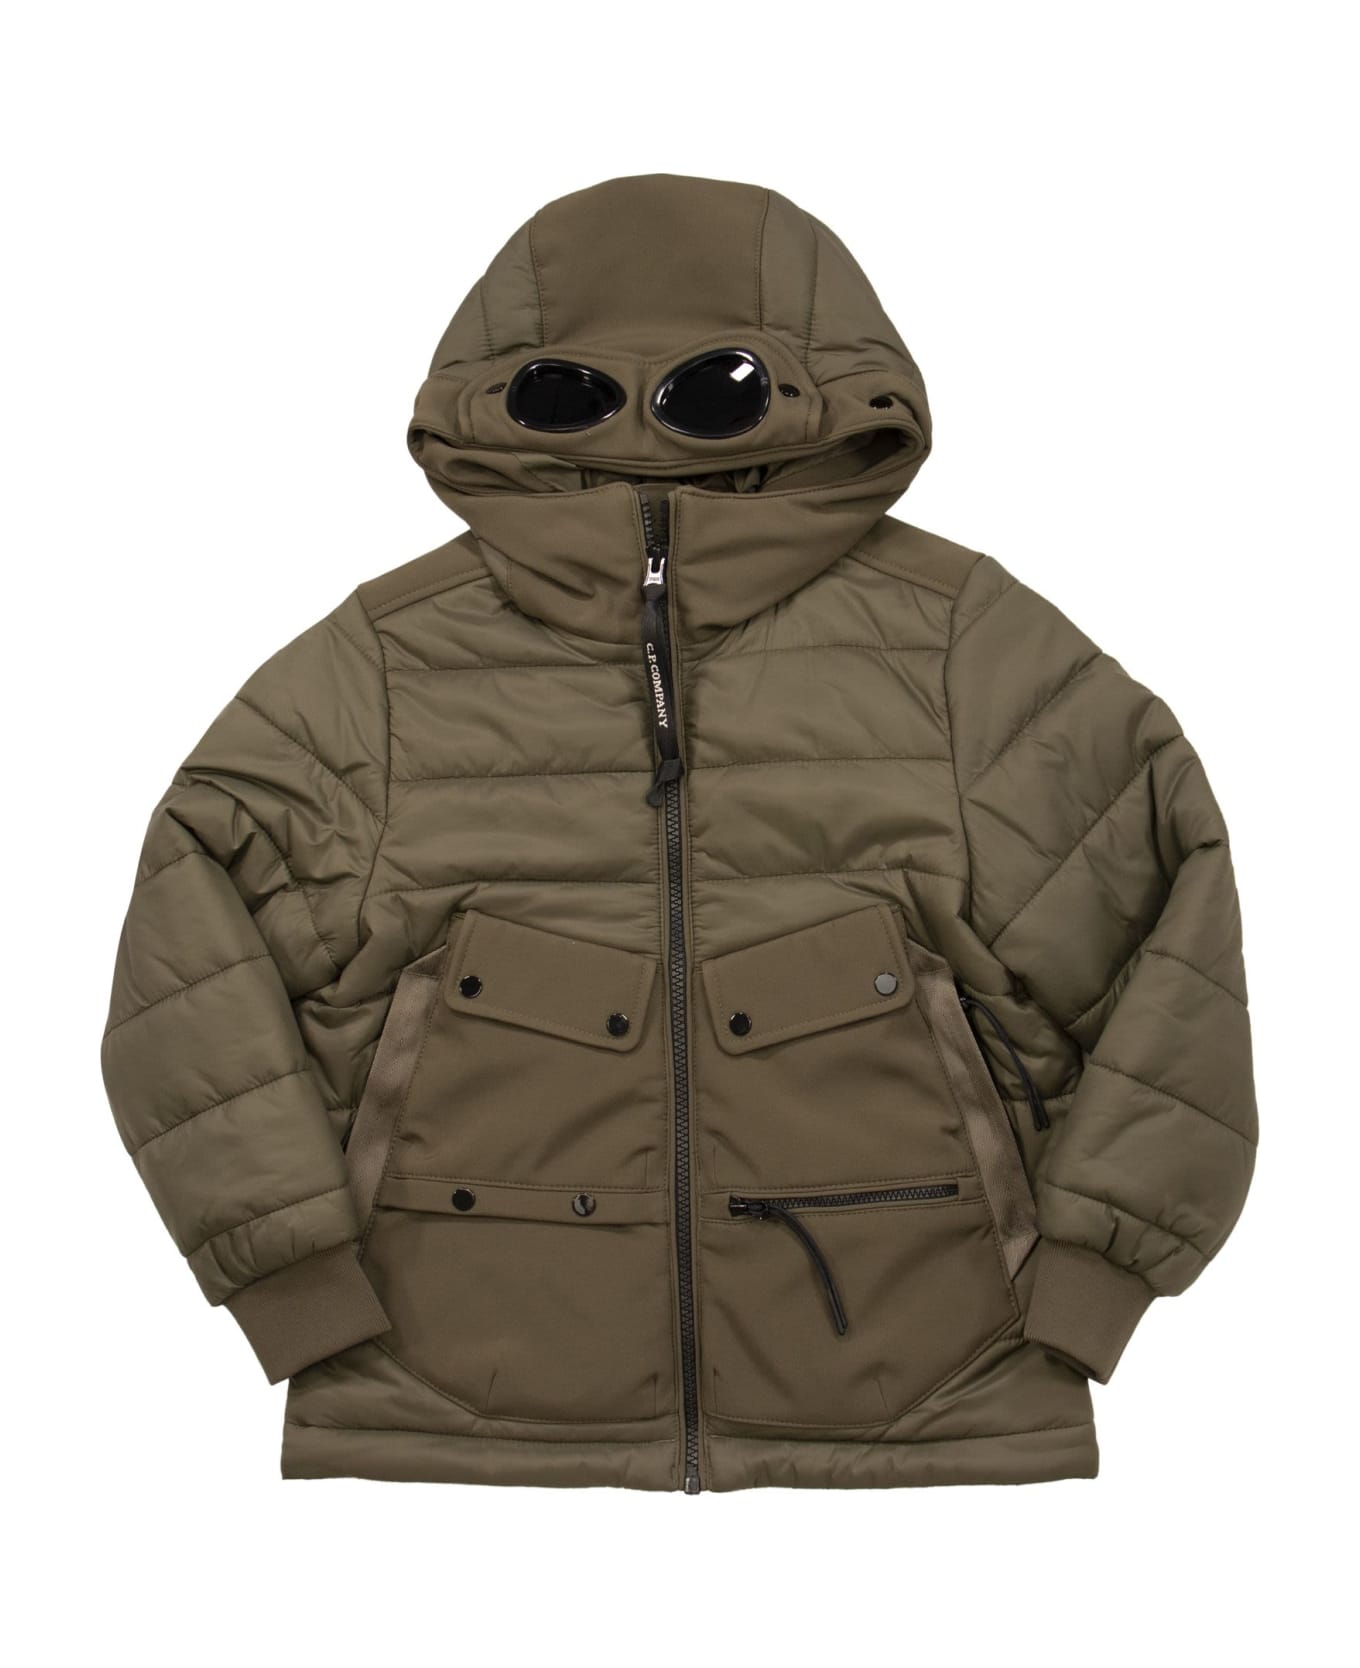 C.P. Company Jacket With Pockets And Hood - Military Green